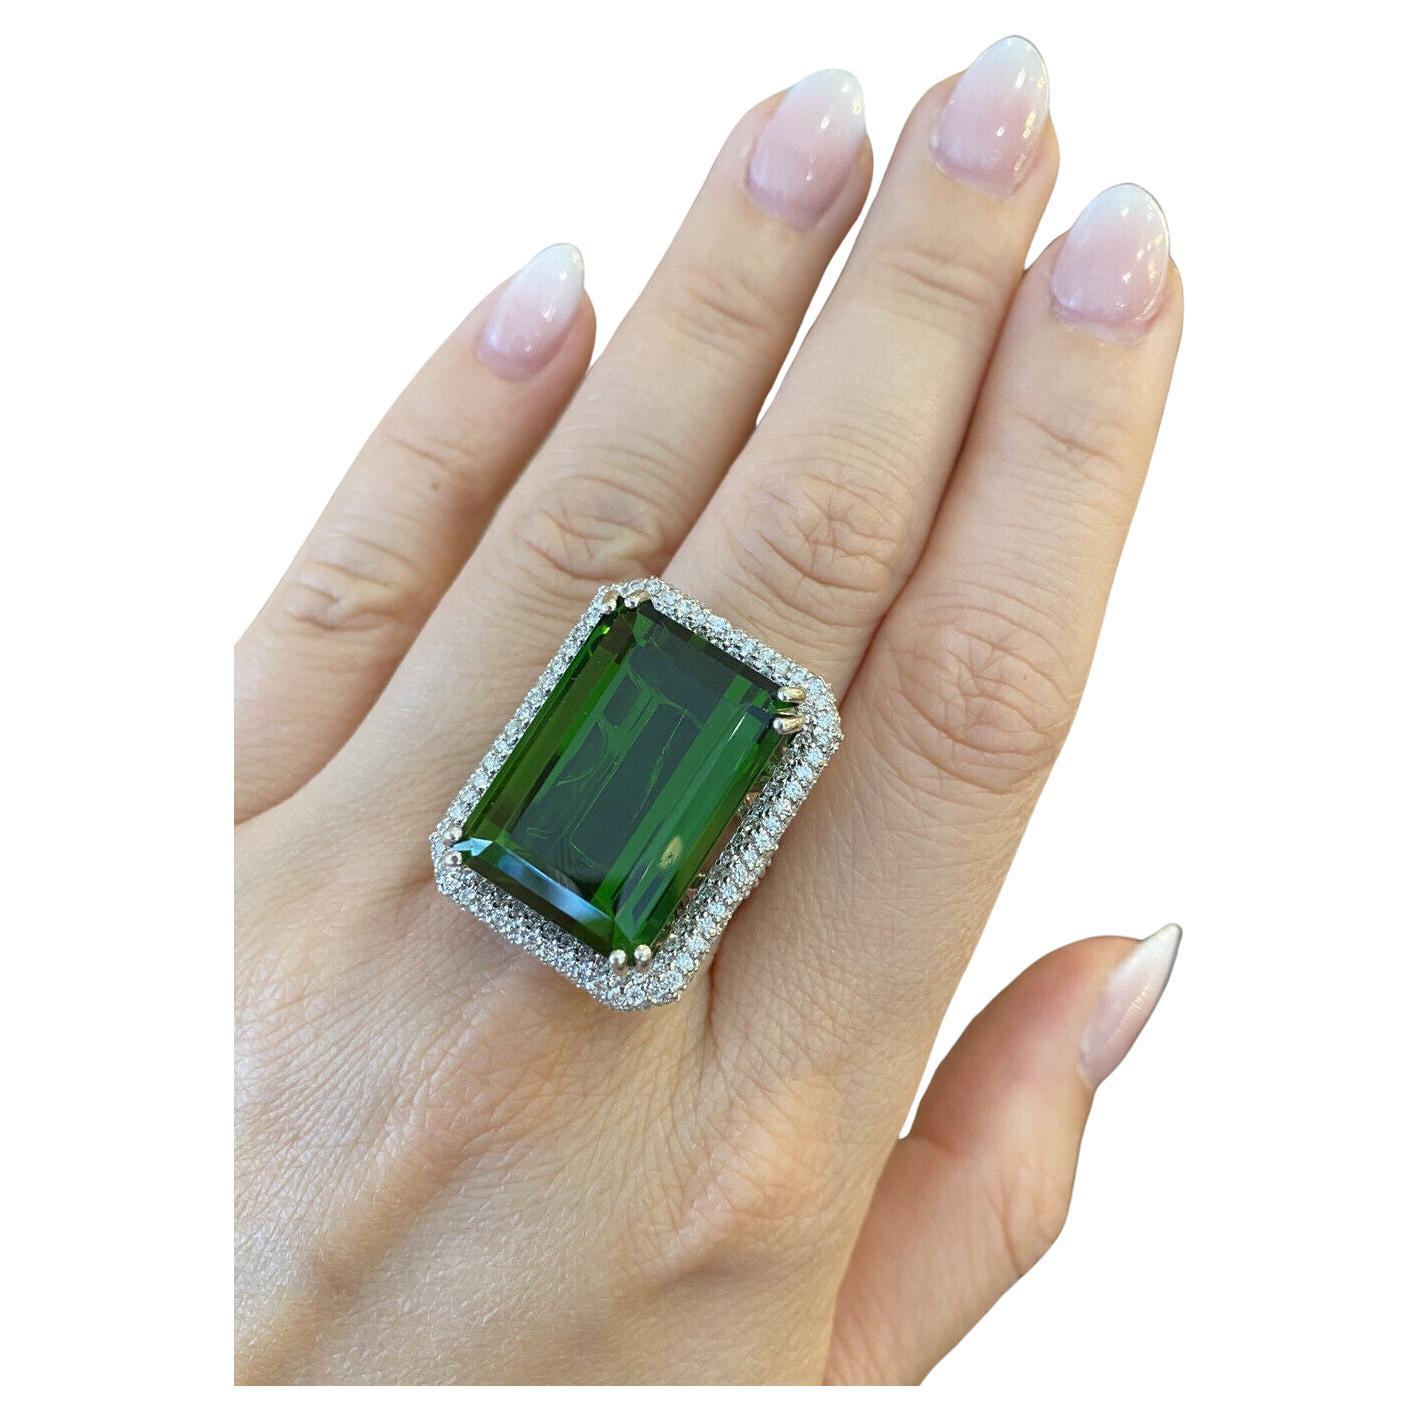 GIA Certified 40.87 Carat Green Tourmaline in Pave Diamond Ring in 18k White Gold

Green Tourmaline and Diamond Ring features a large Rectangular Emerald Cut Green Tourmaline surrounded by Round Brilliant cut Diamonds pave set in 18k White